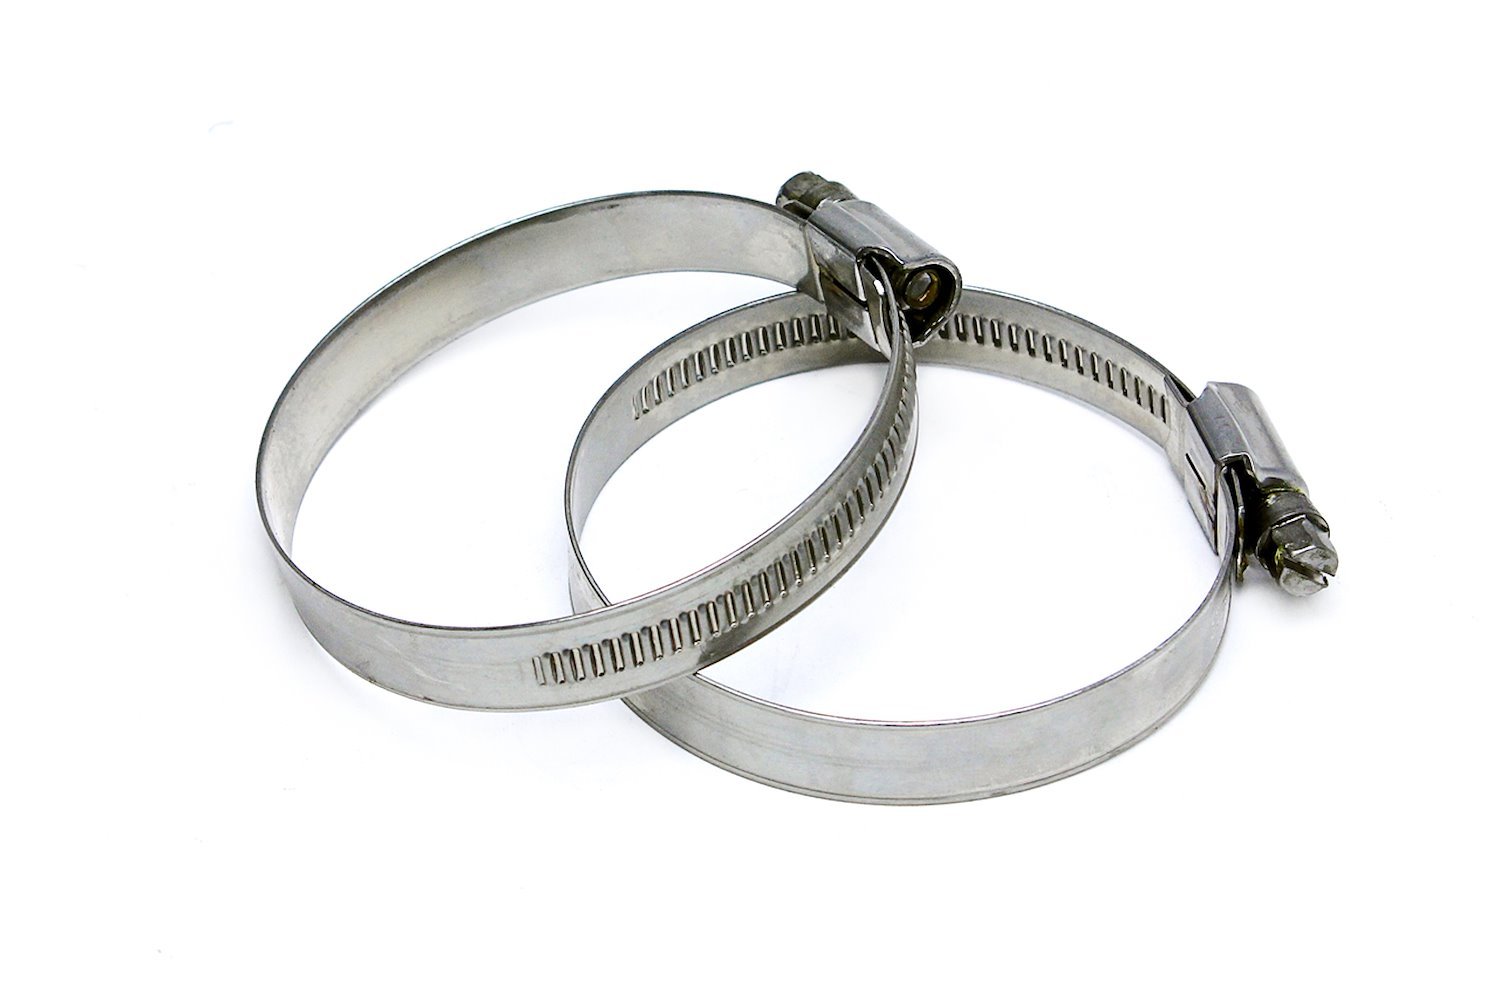 EMSC-110-130x2 Embossed Hose Clamp, Stainless Steel Embossed Hose Clamp, Size #72, Effective Range: 4-5/16 in.- 5 in., 2Pc